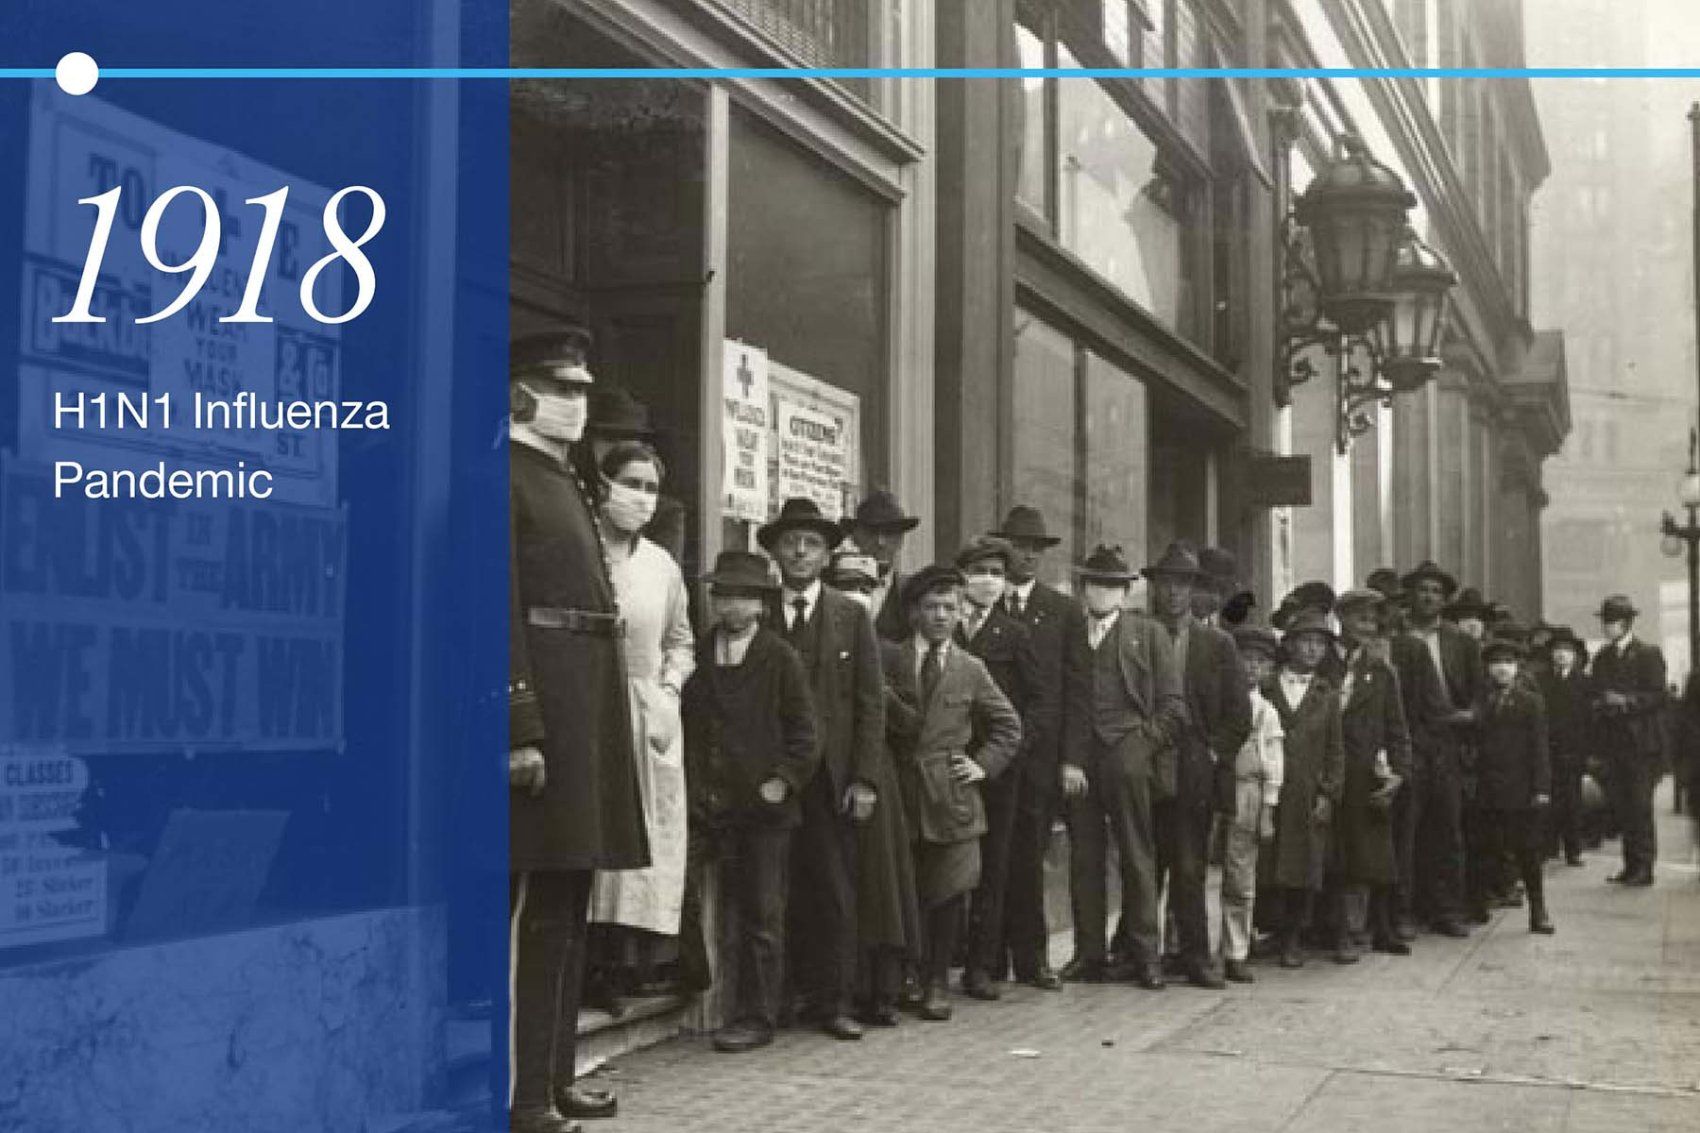 Residents line up to get masks during the spanish influenza outbreak in 1918